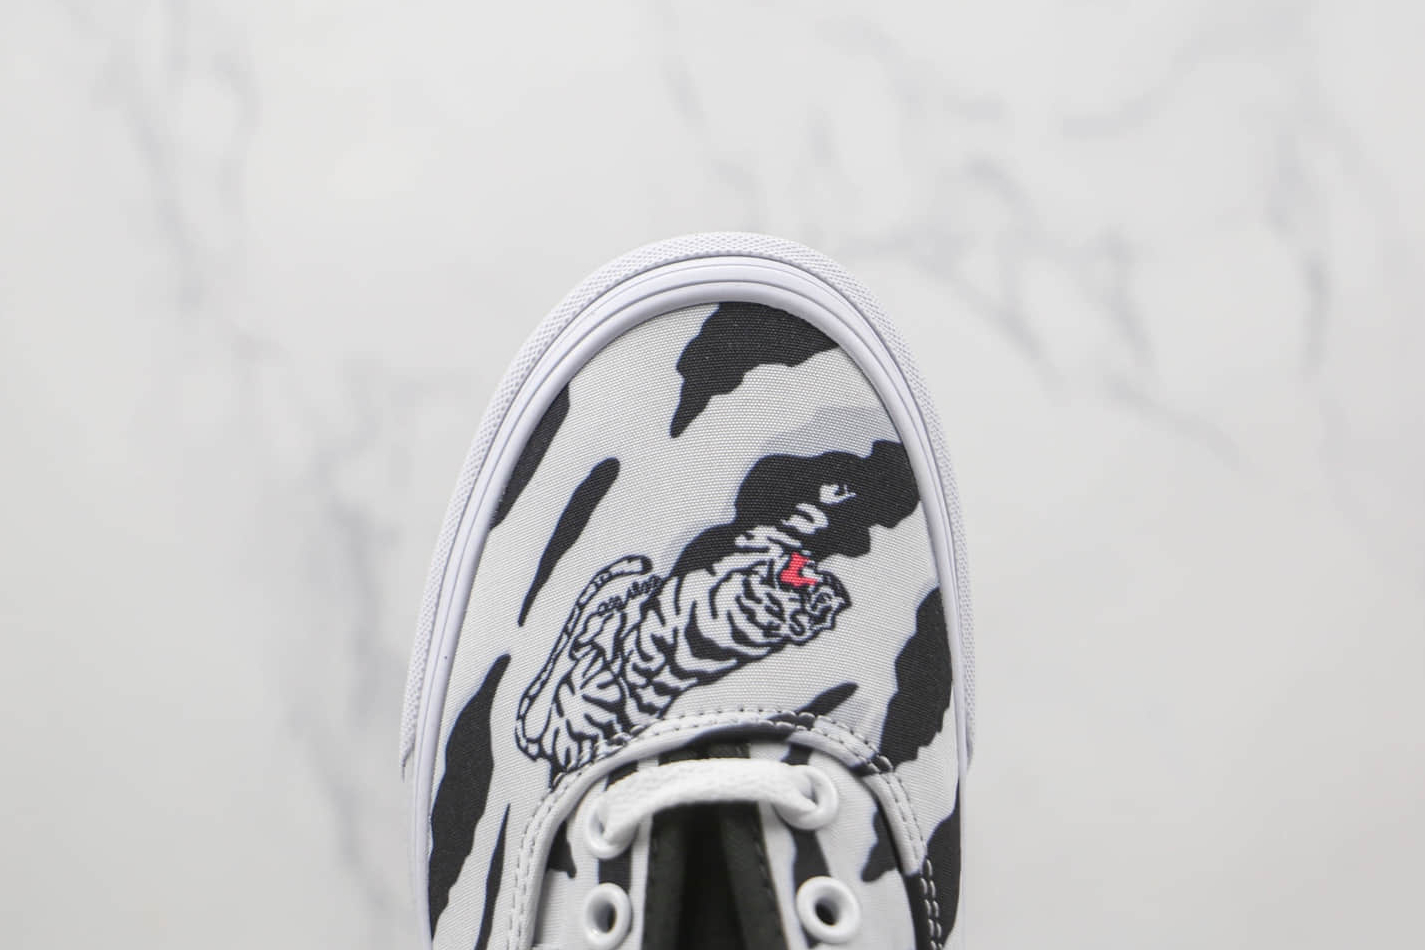 Vans Authentic Low-Top Sneakers Black White - Unisex Shoes | Free Shipping